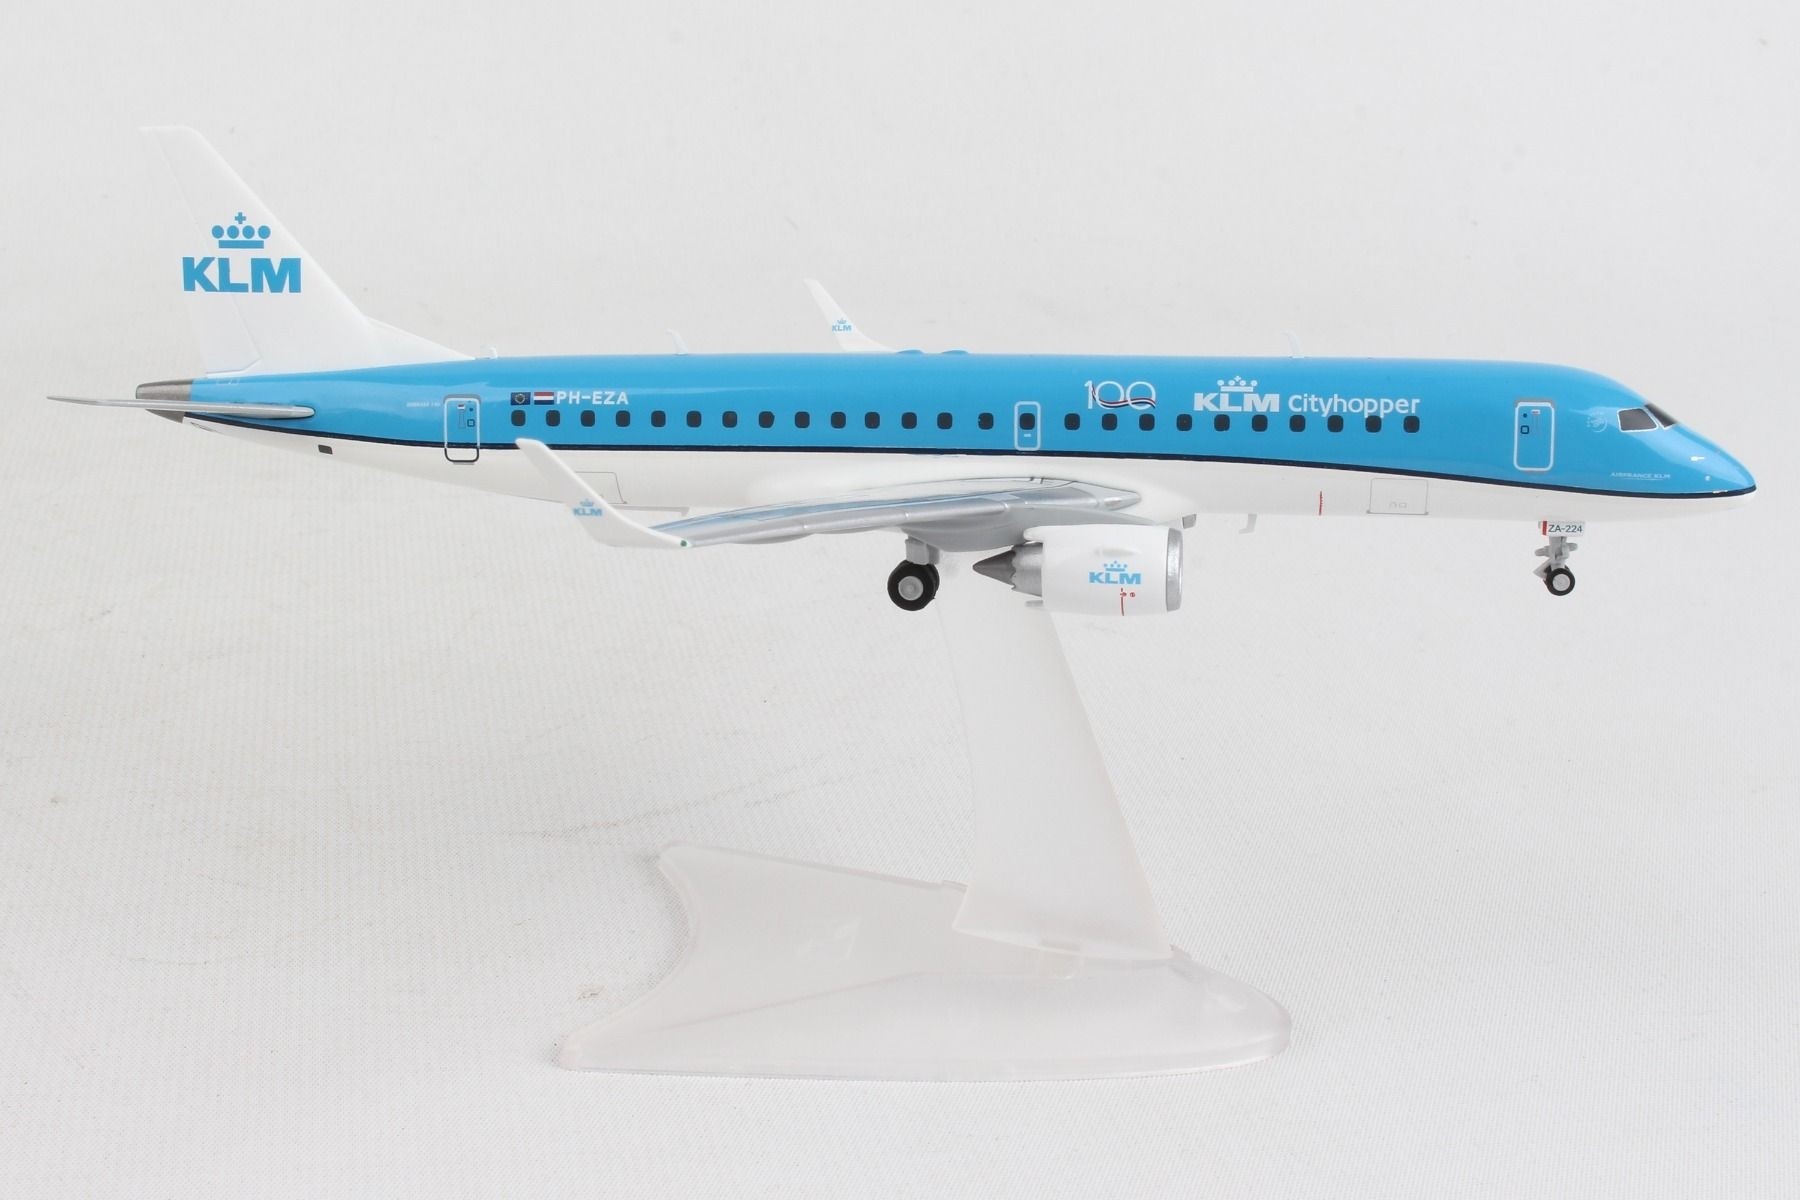 Herpa Wings 1:200  Embraer E190  KLM Cityhopper  557580-001  Modellairport500 